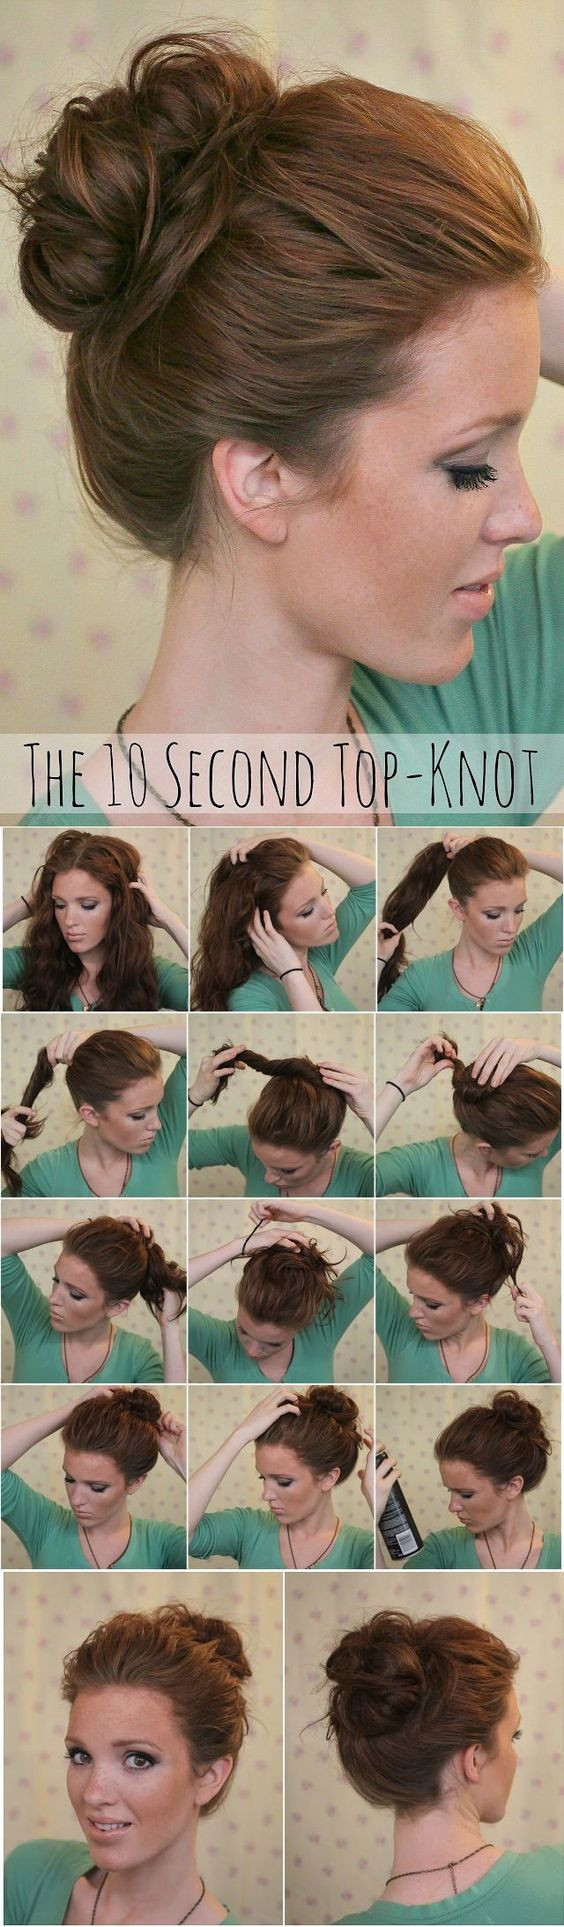 Super Cute And Easy Hairstyles
 How to Wear a Messy Bun With Tutorials Hairstyles Weekly